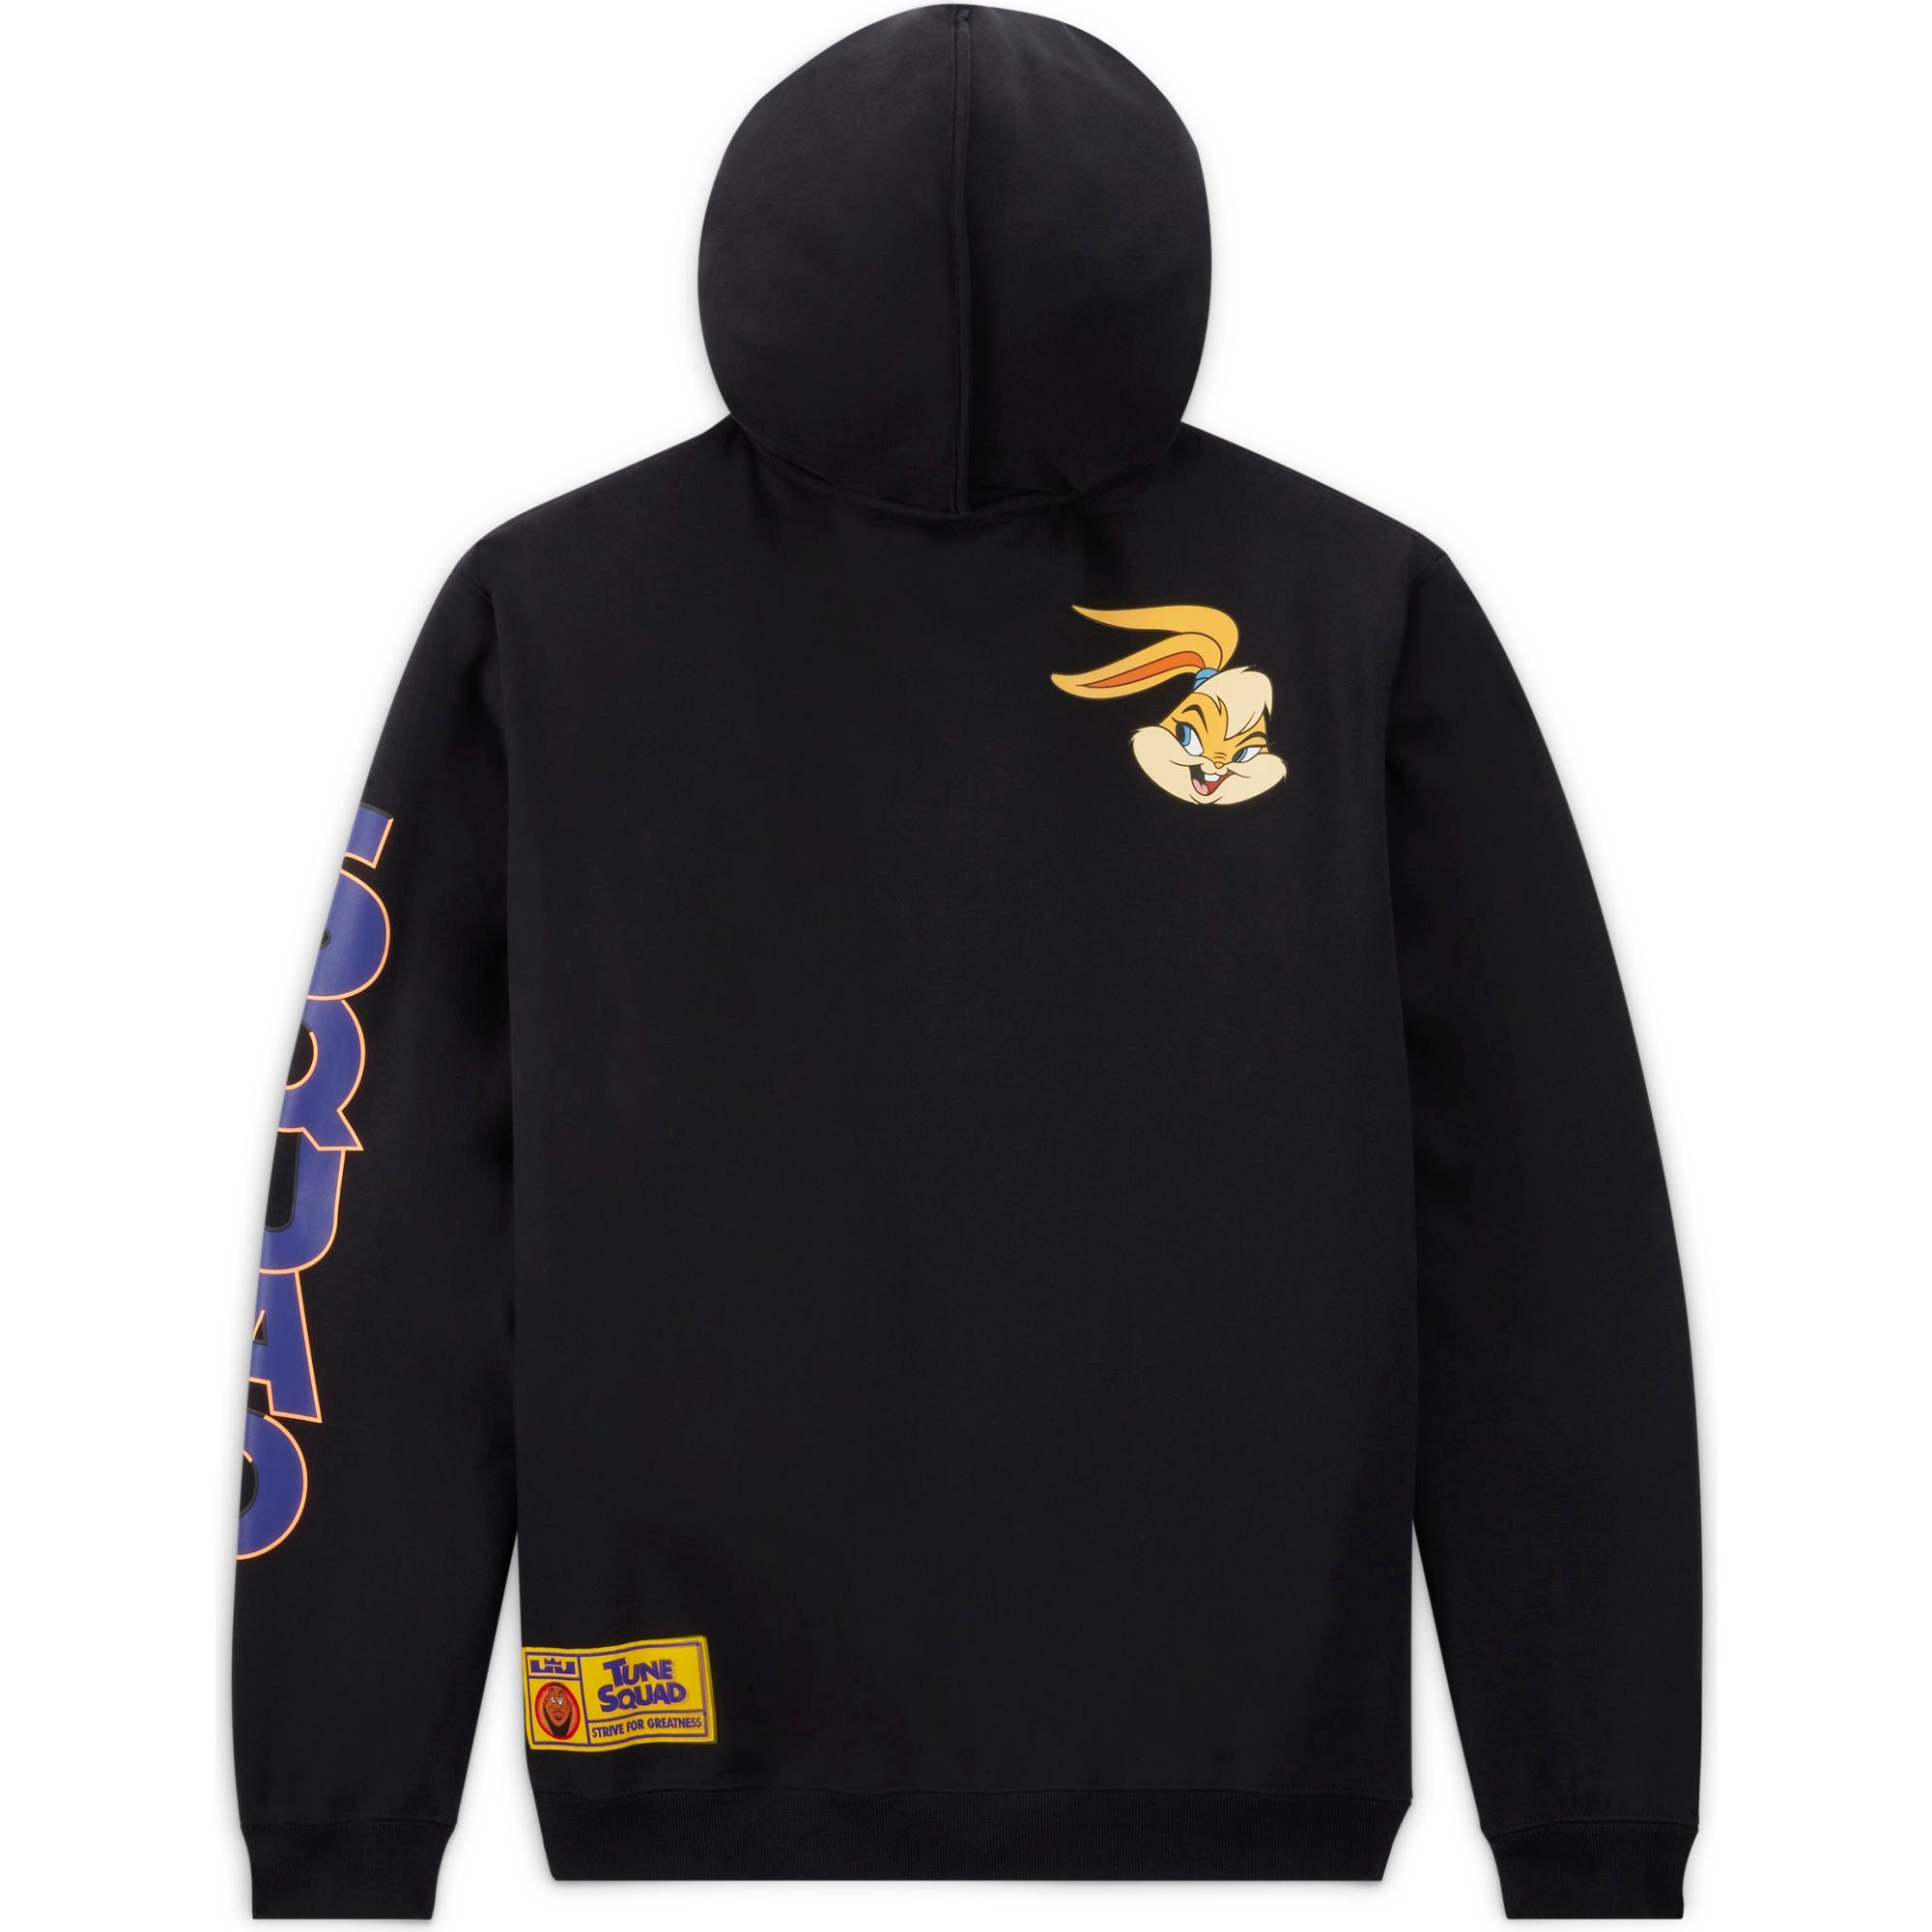 Space Jam Tune Squad Hoodie, Official Space Jam Merch UK